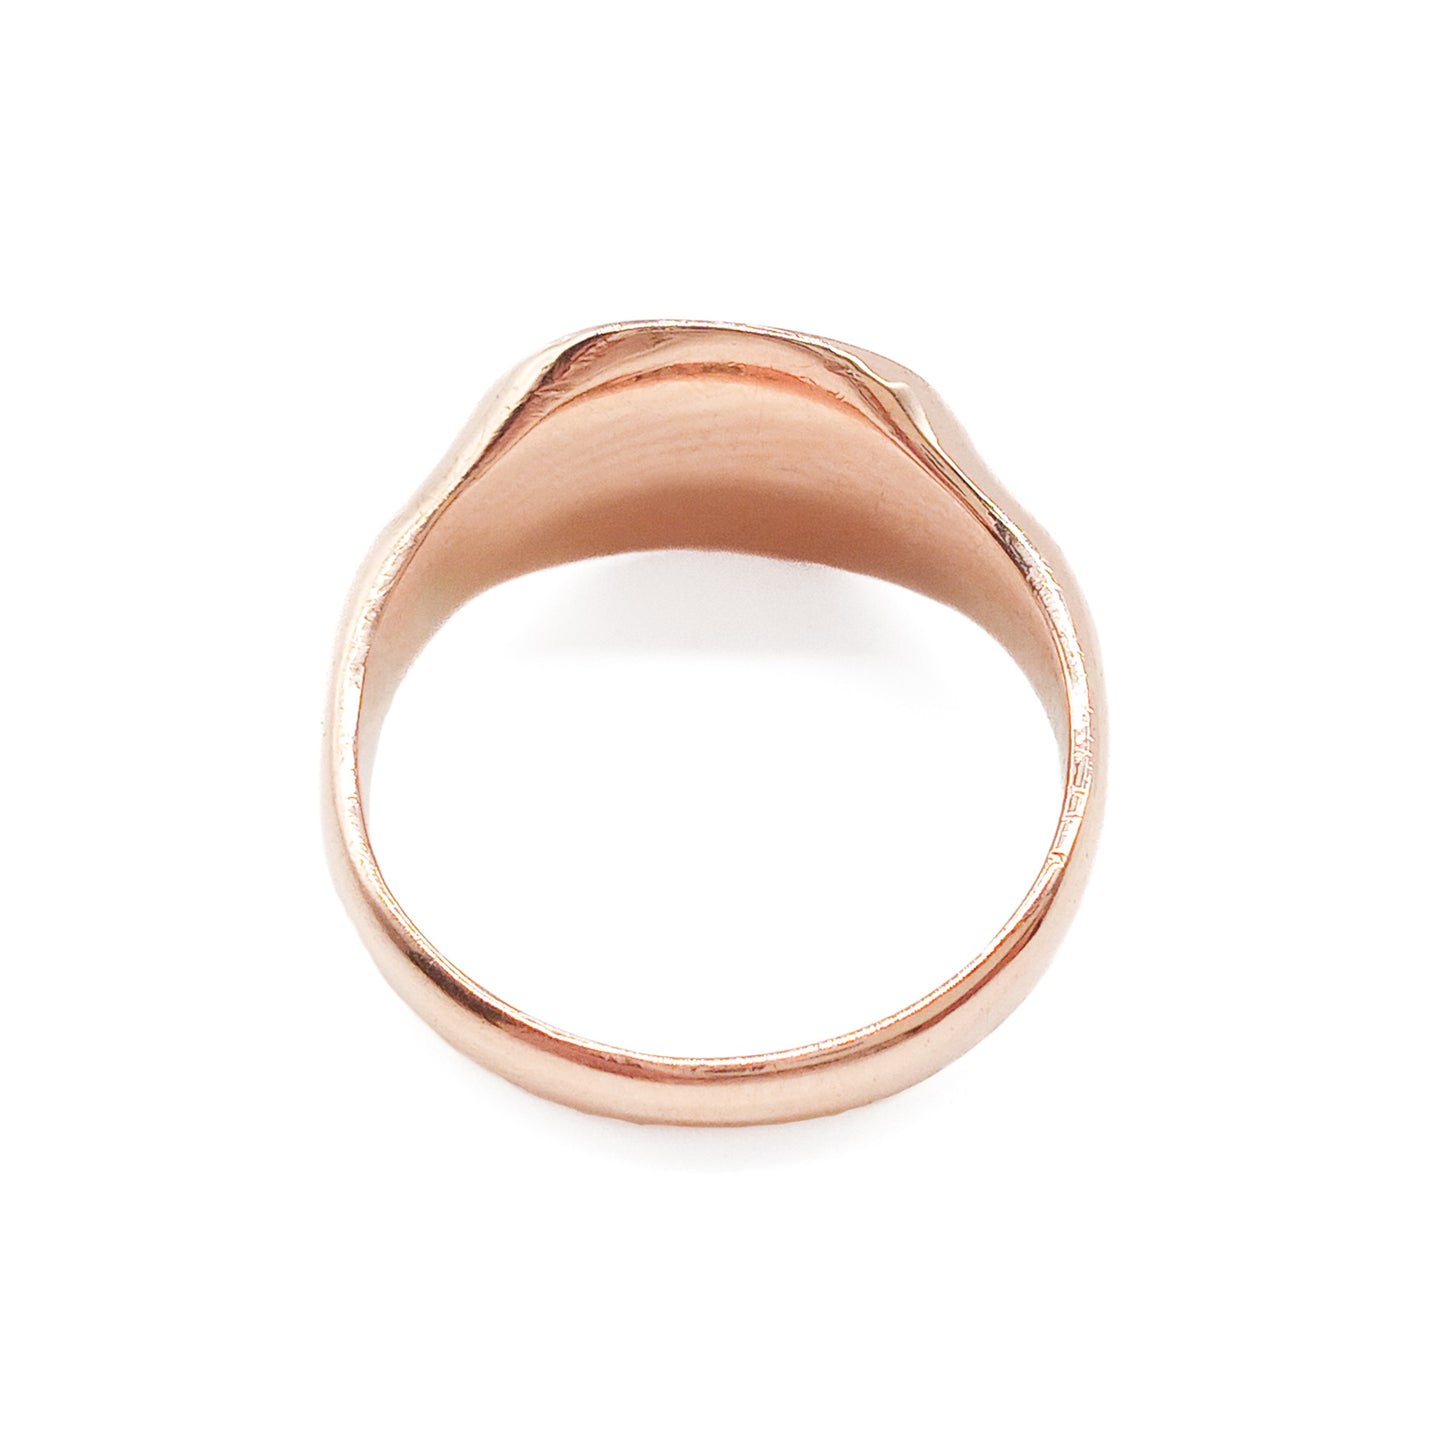 Classic 9ct rose gold signet ring. Ideal to be engraved. Birmingham 1913